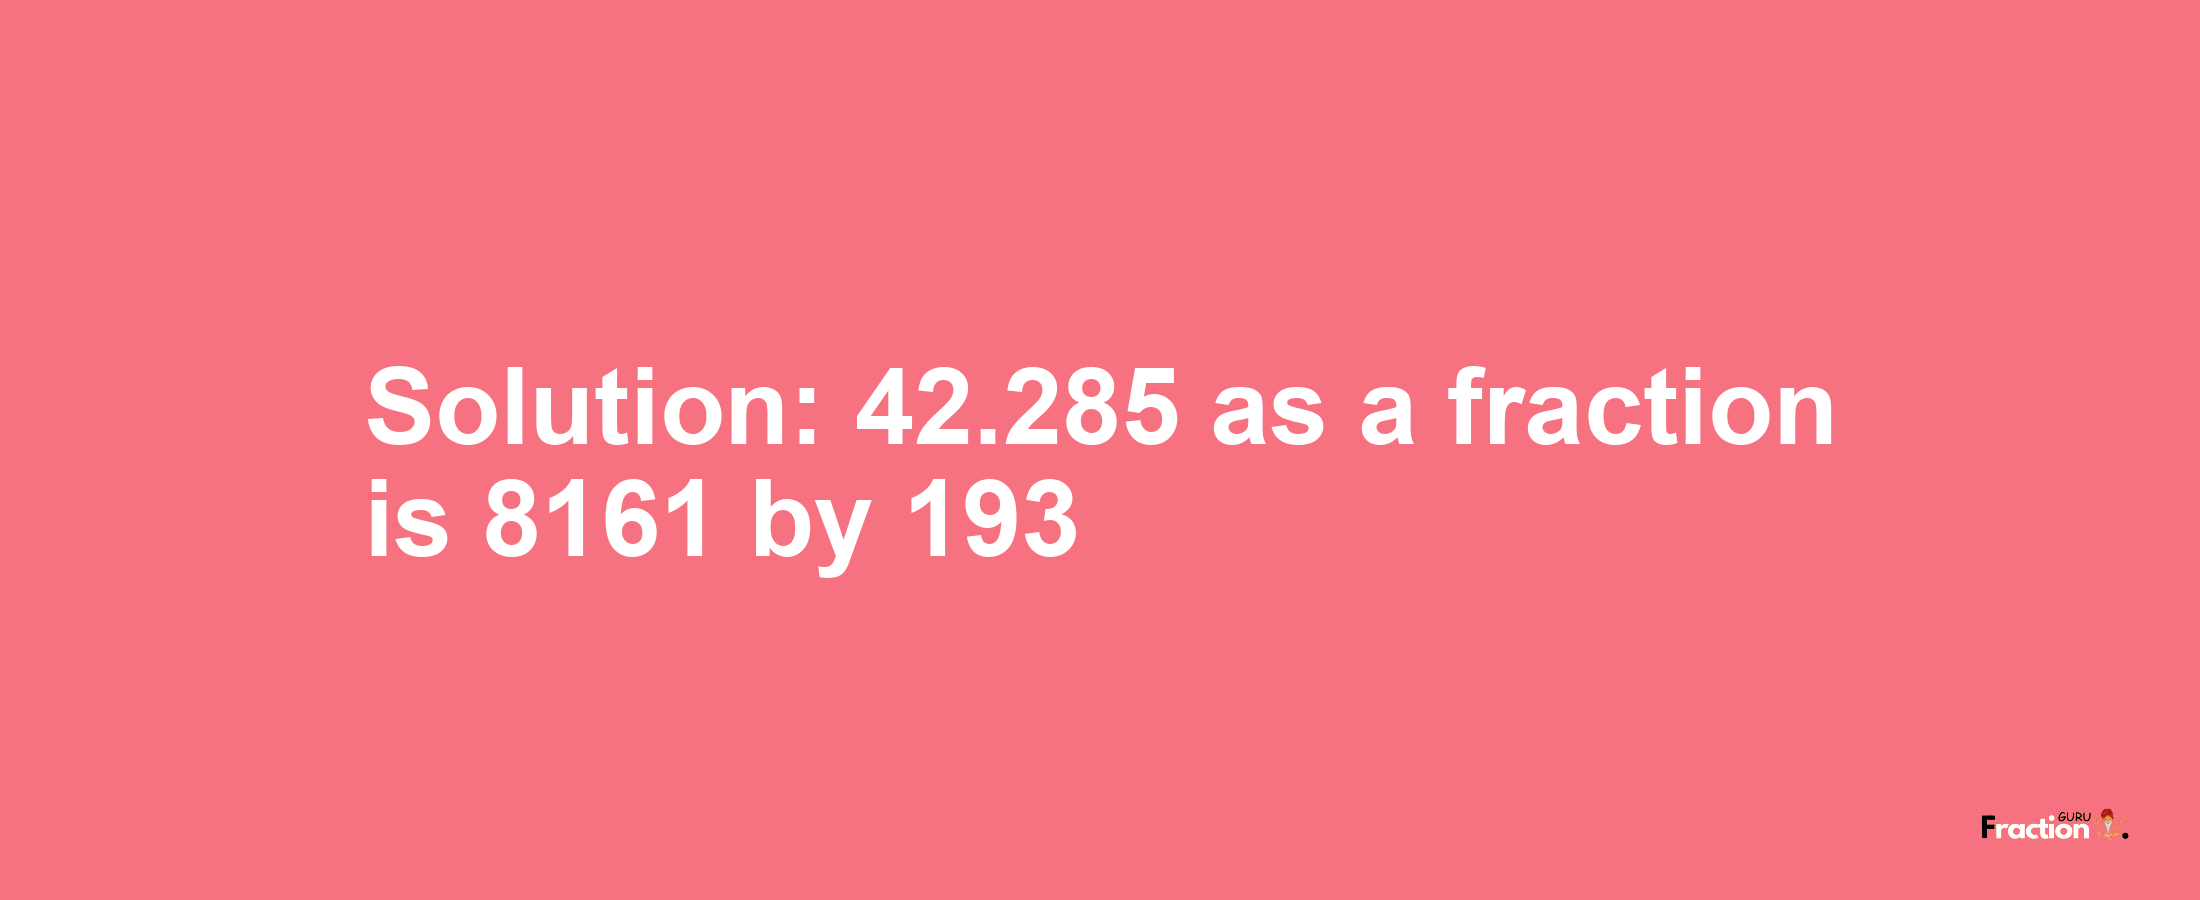 Solution:42.285 as a fraction is 8161/193